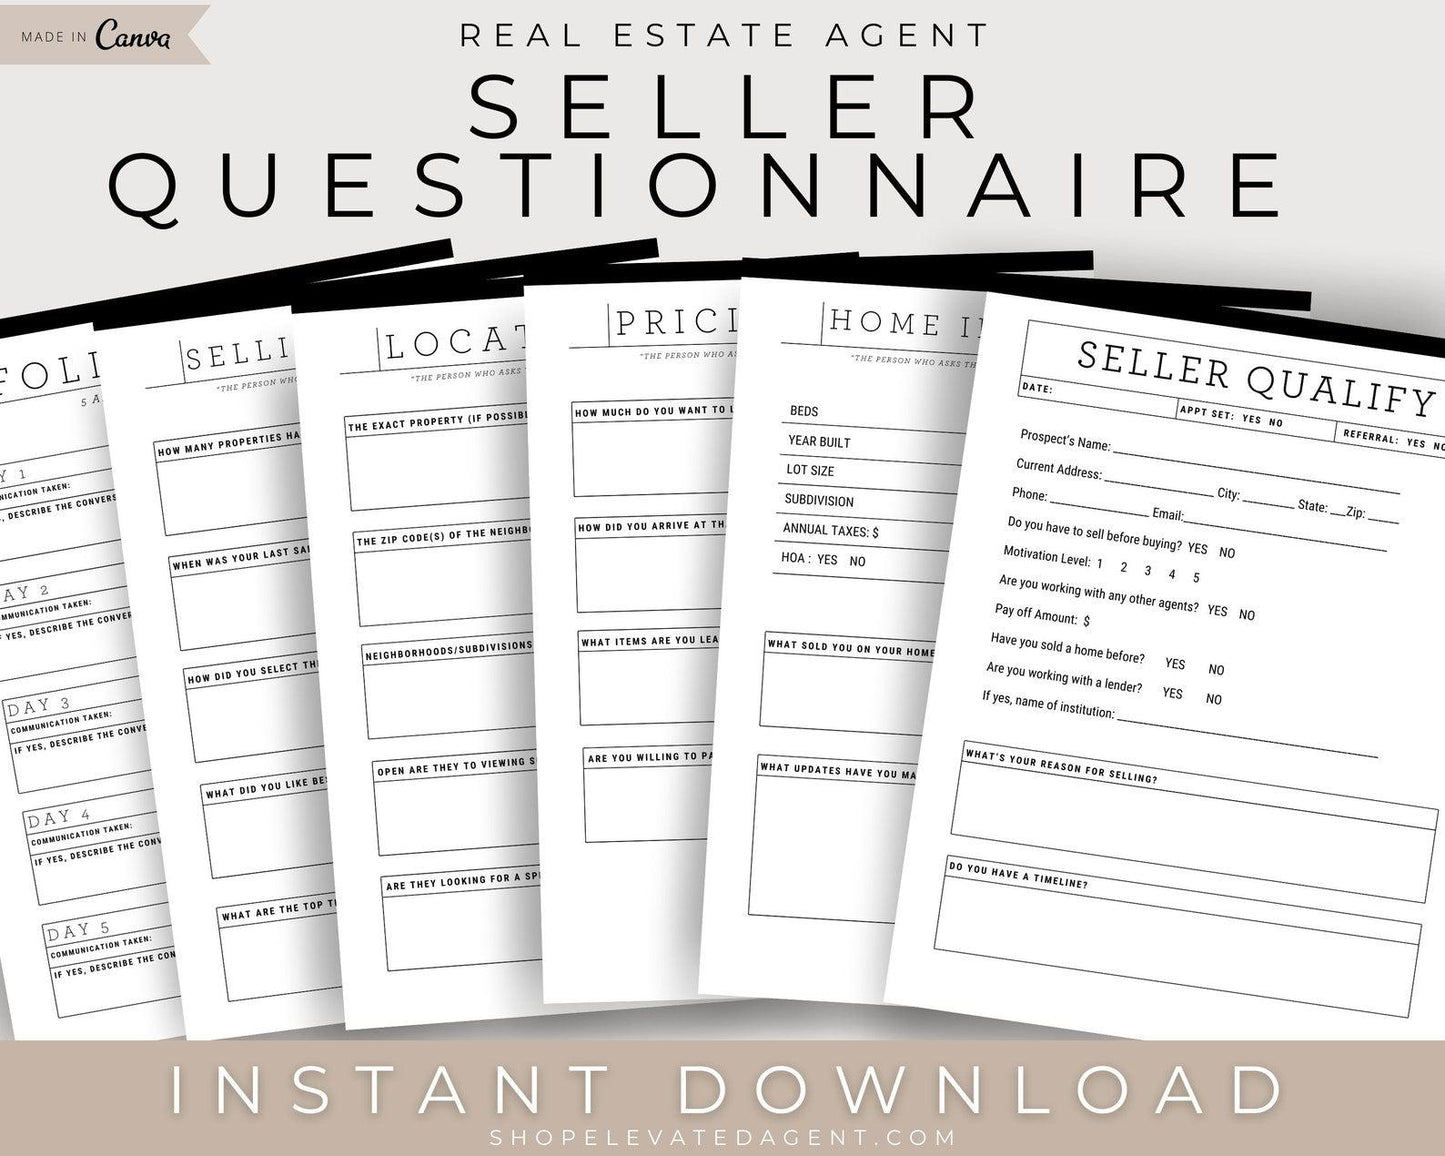 Real Estate Agent Seller Questionnaire Instant Download